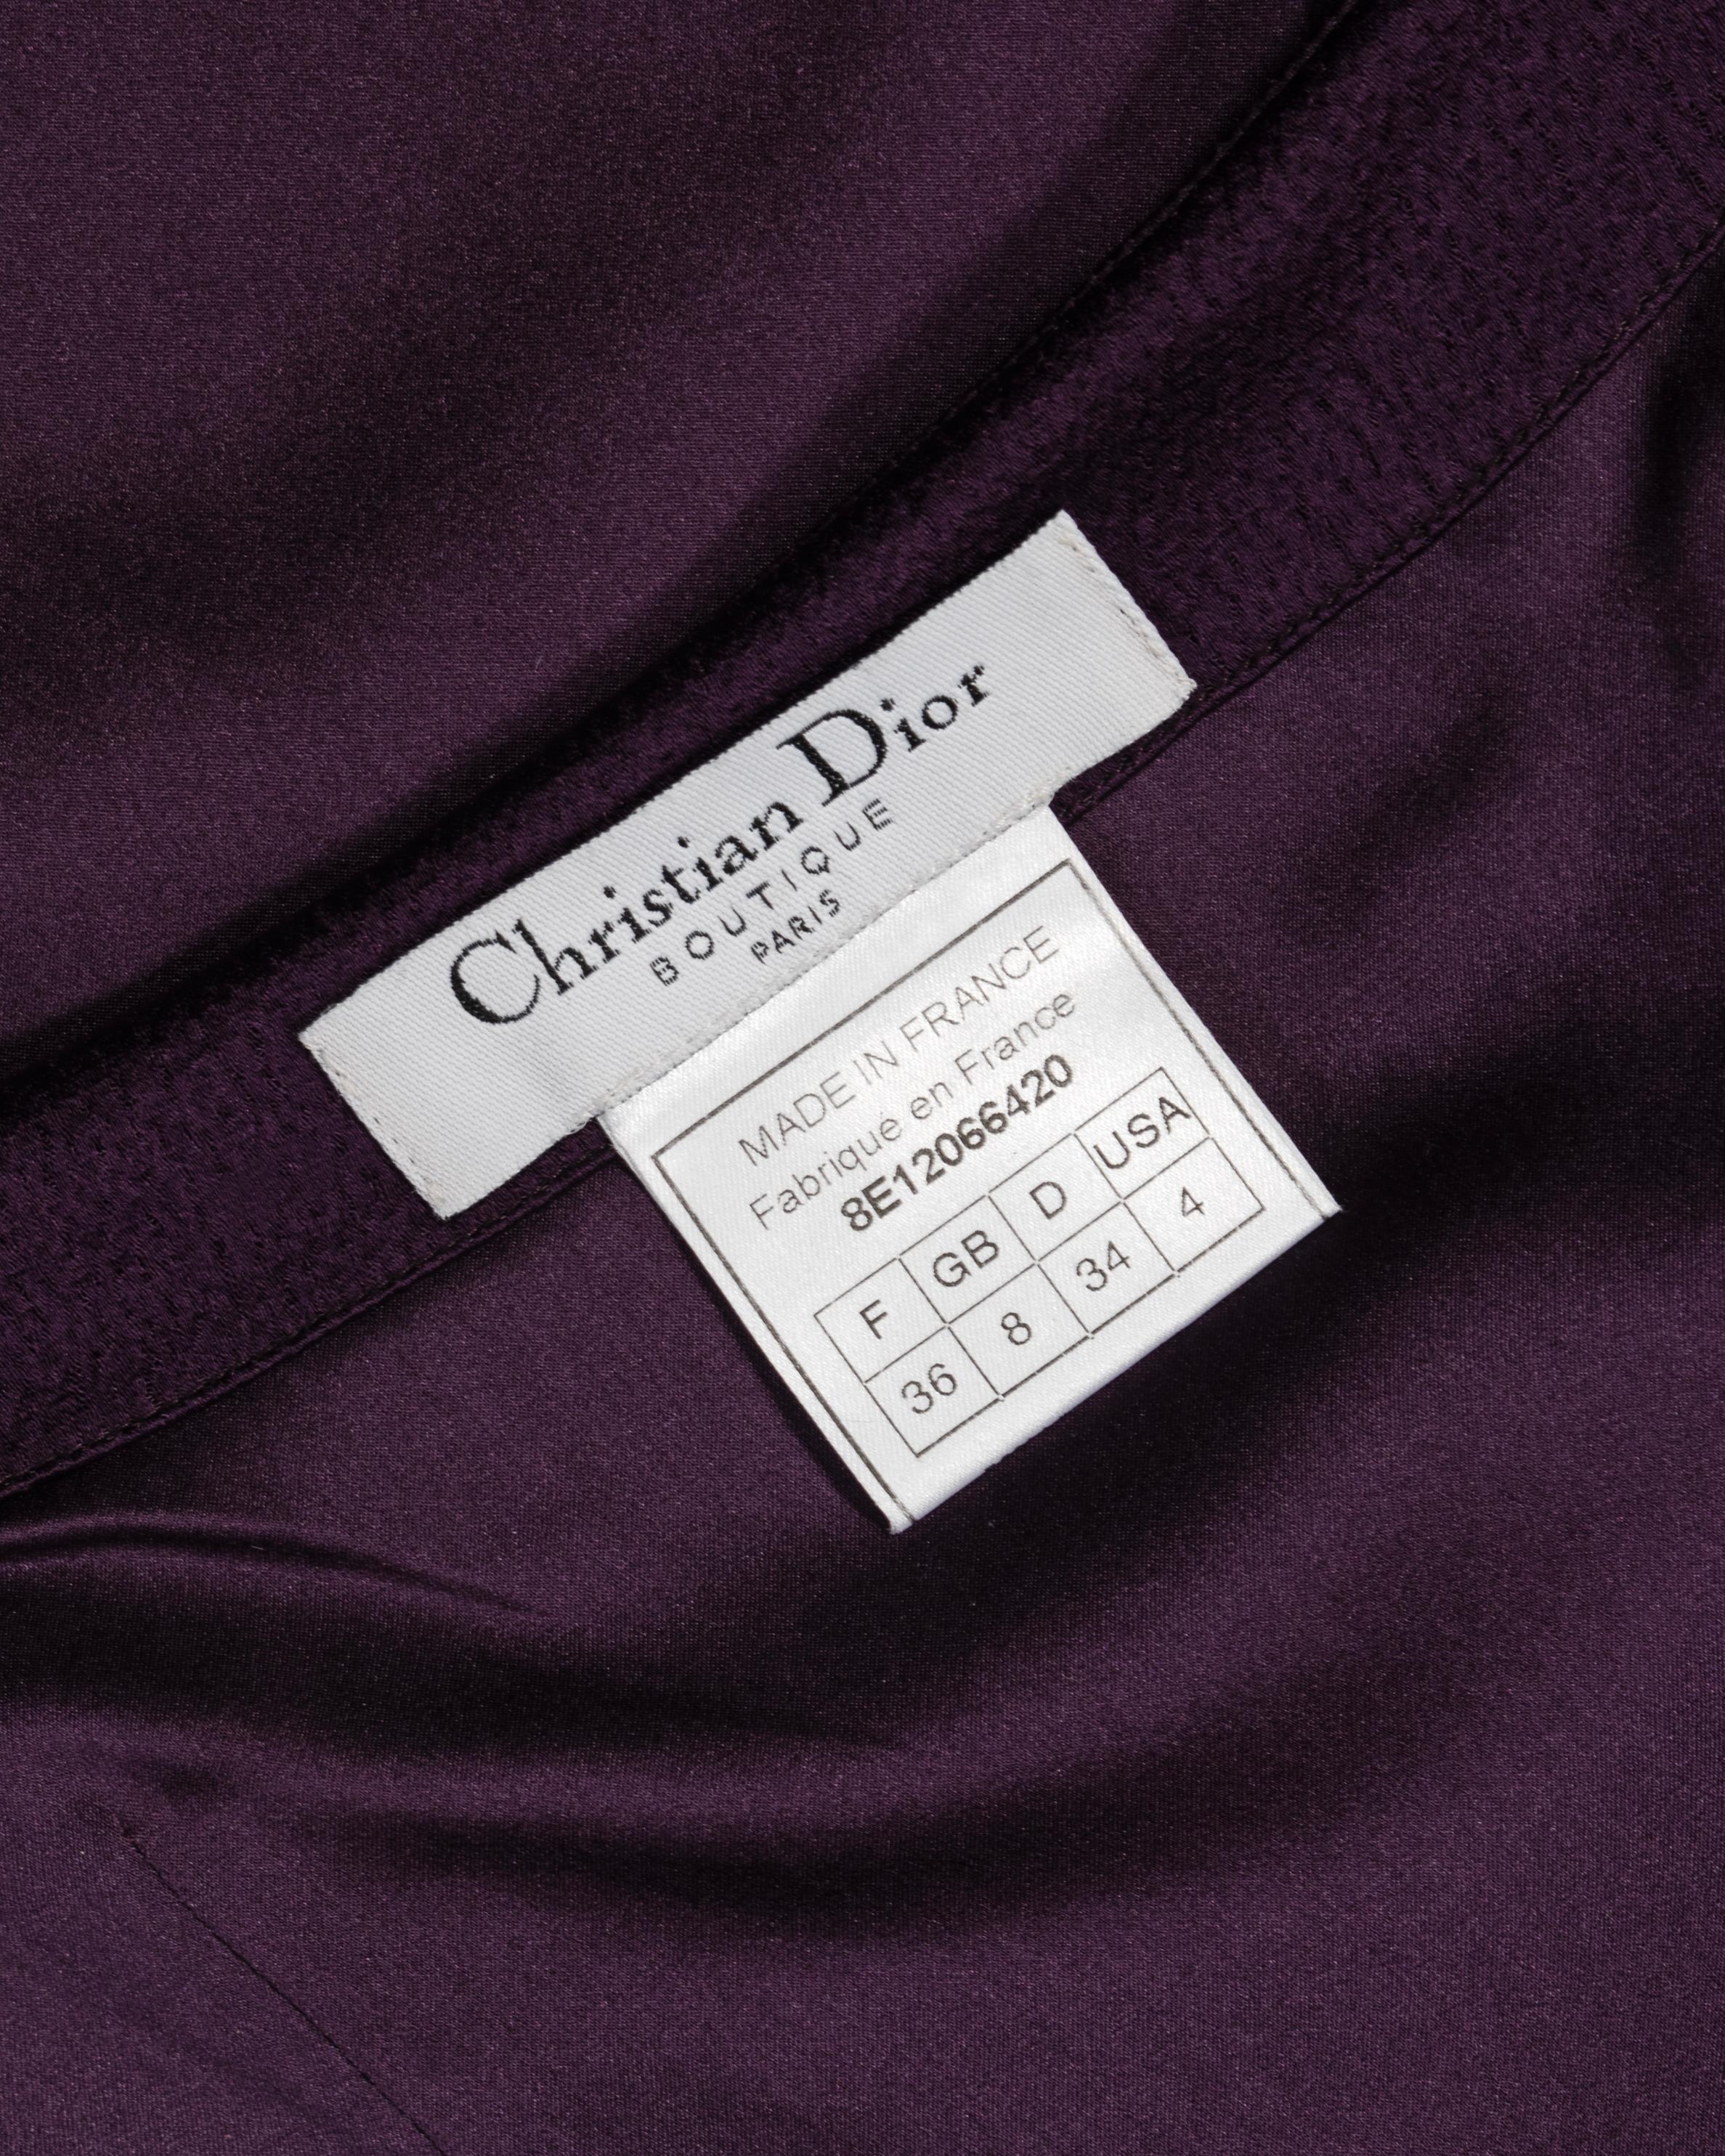 Christian Dior by John Galliano Purple Satin Evening Dress and Shawl, ss 1998 For Sale 7